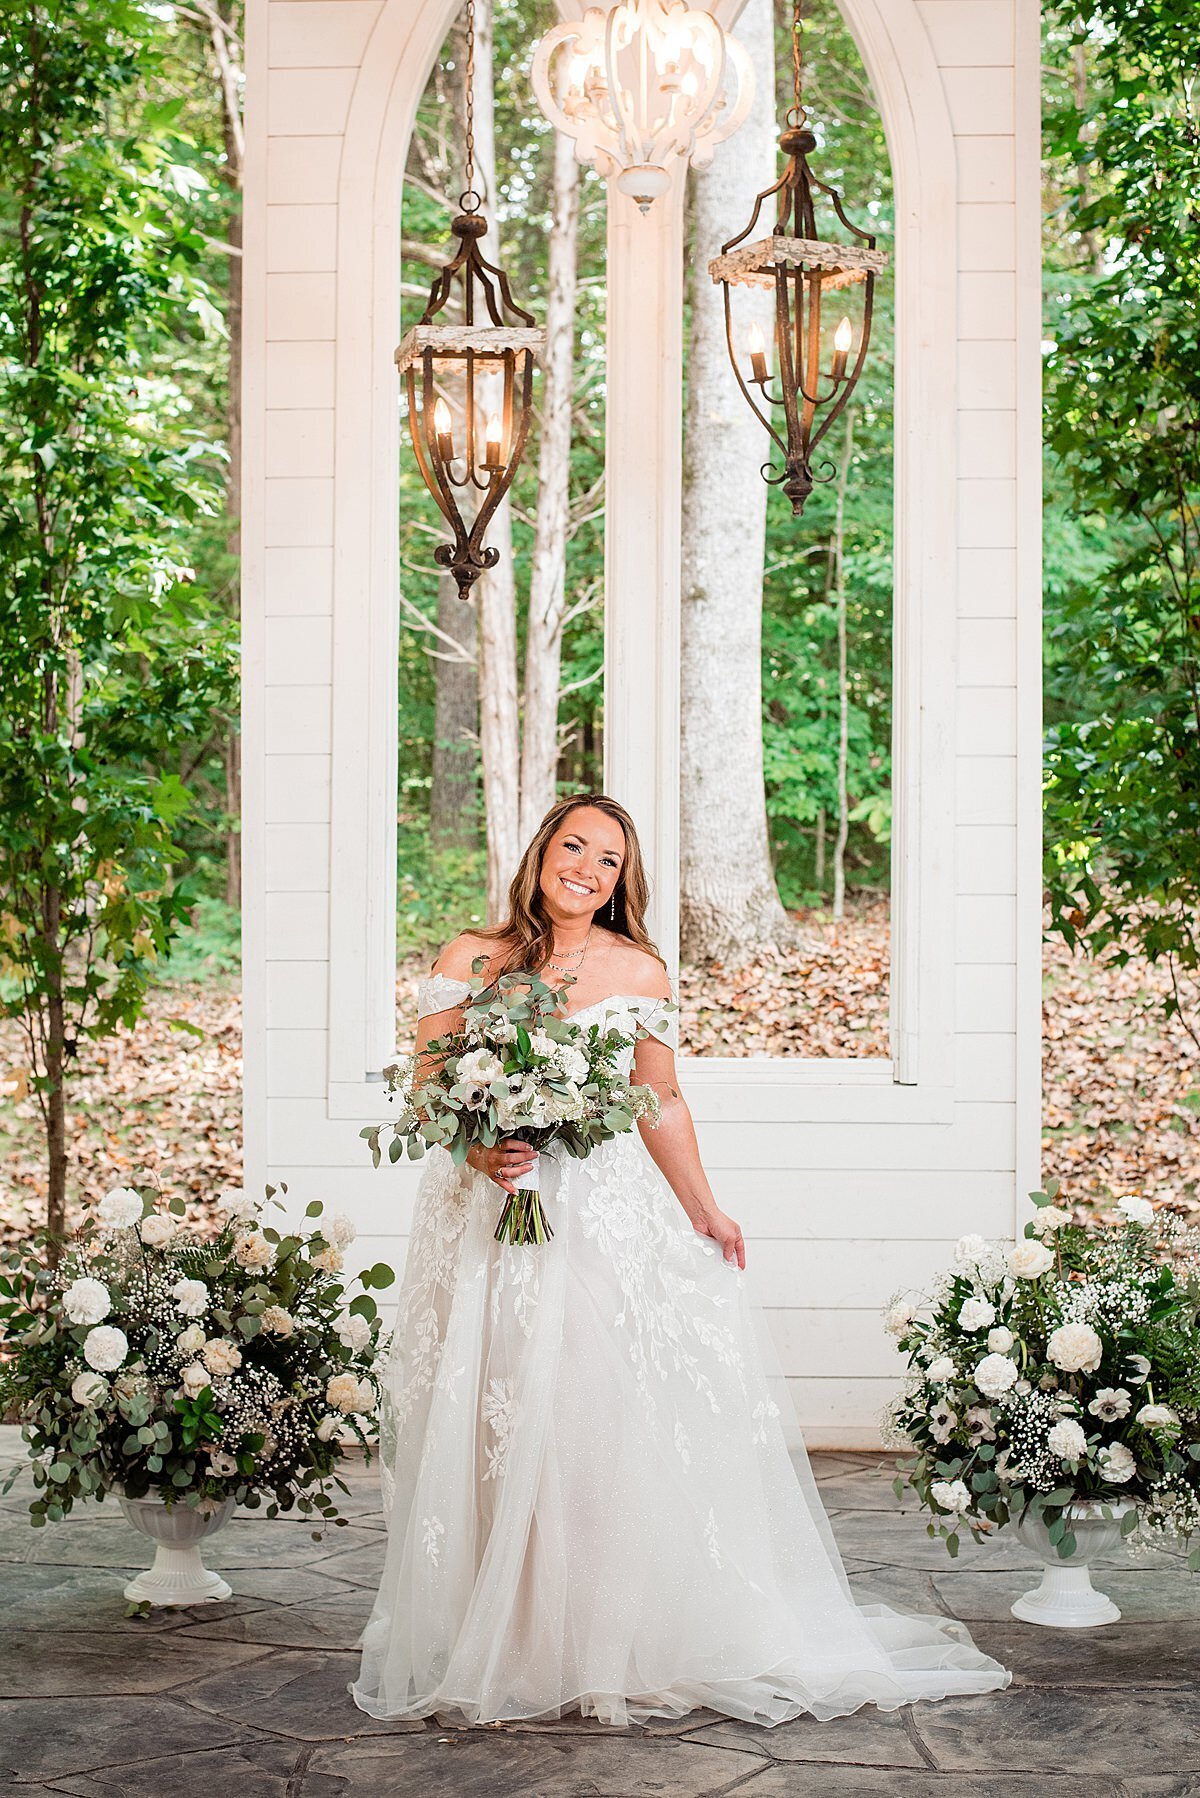 Bride standing beside large flower arrnagements underneath lanterns in the open air church at Firefly Lane